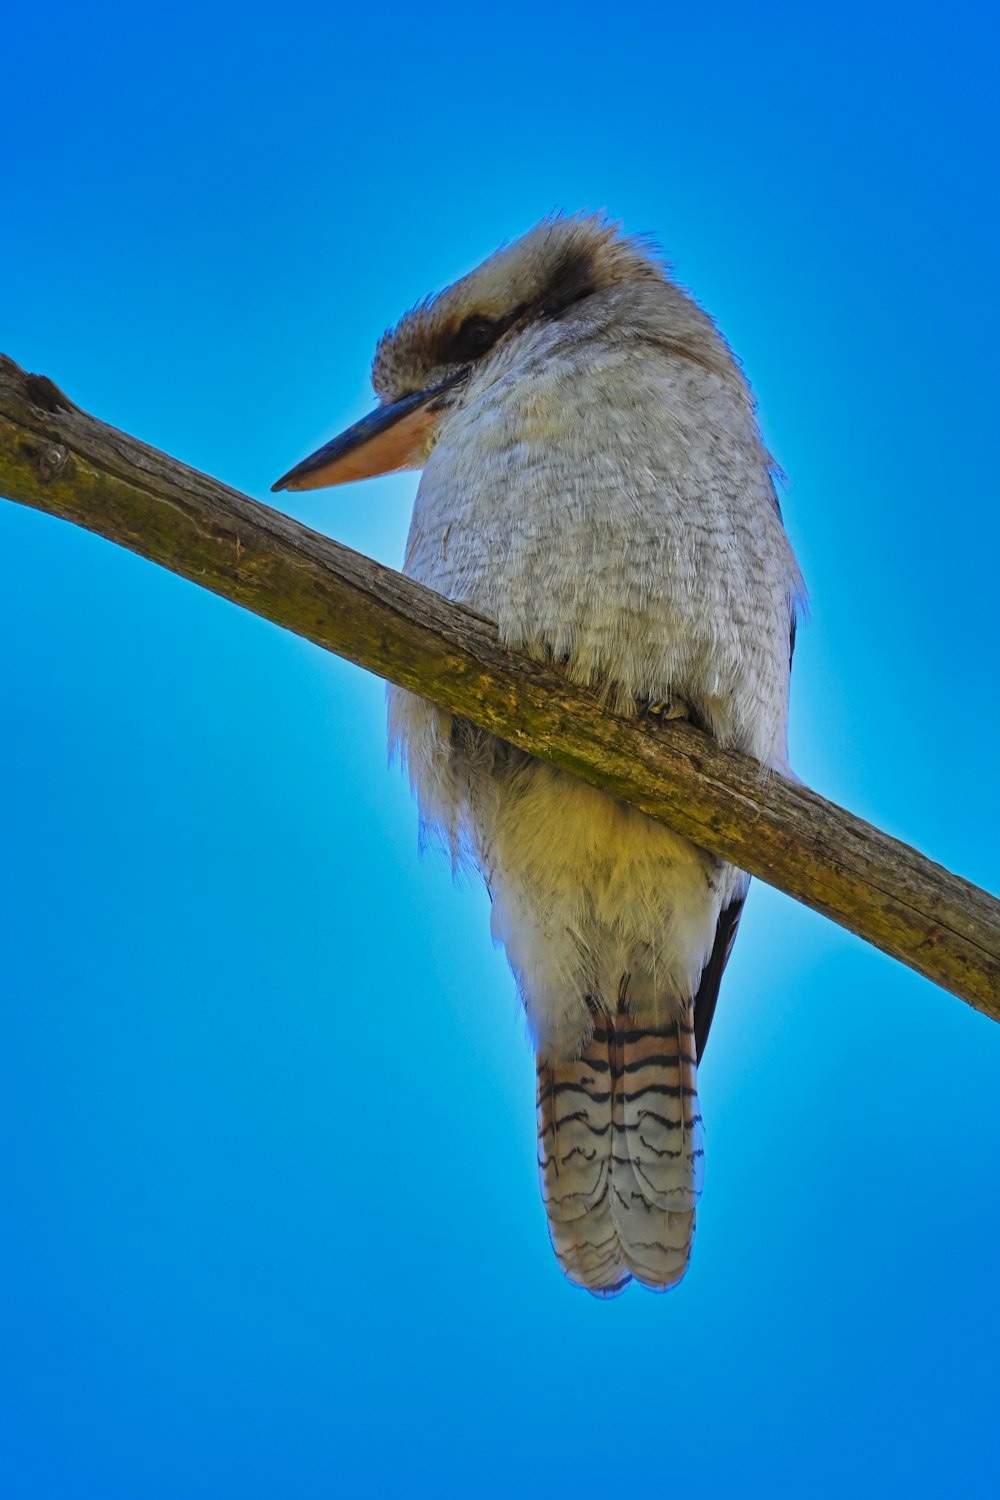 a bird sitting on a branch with a blue sky in the background